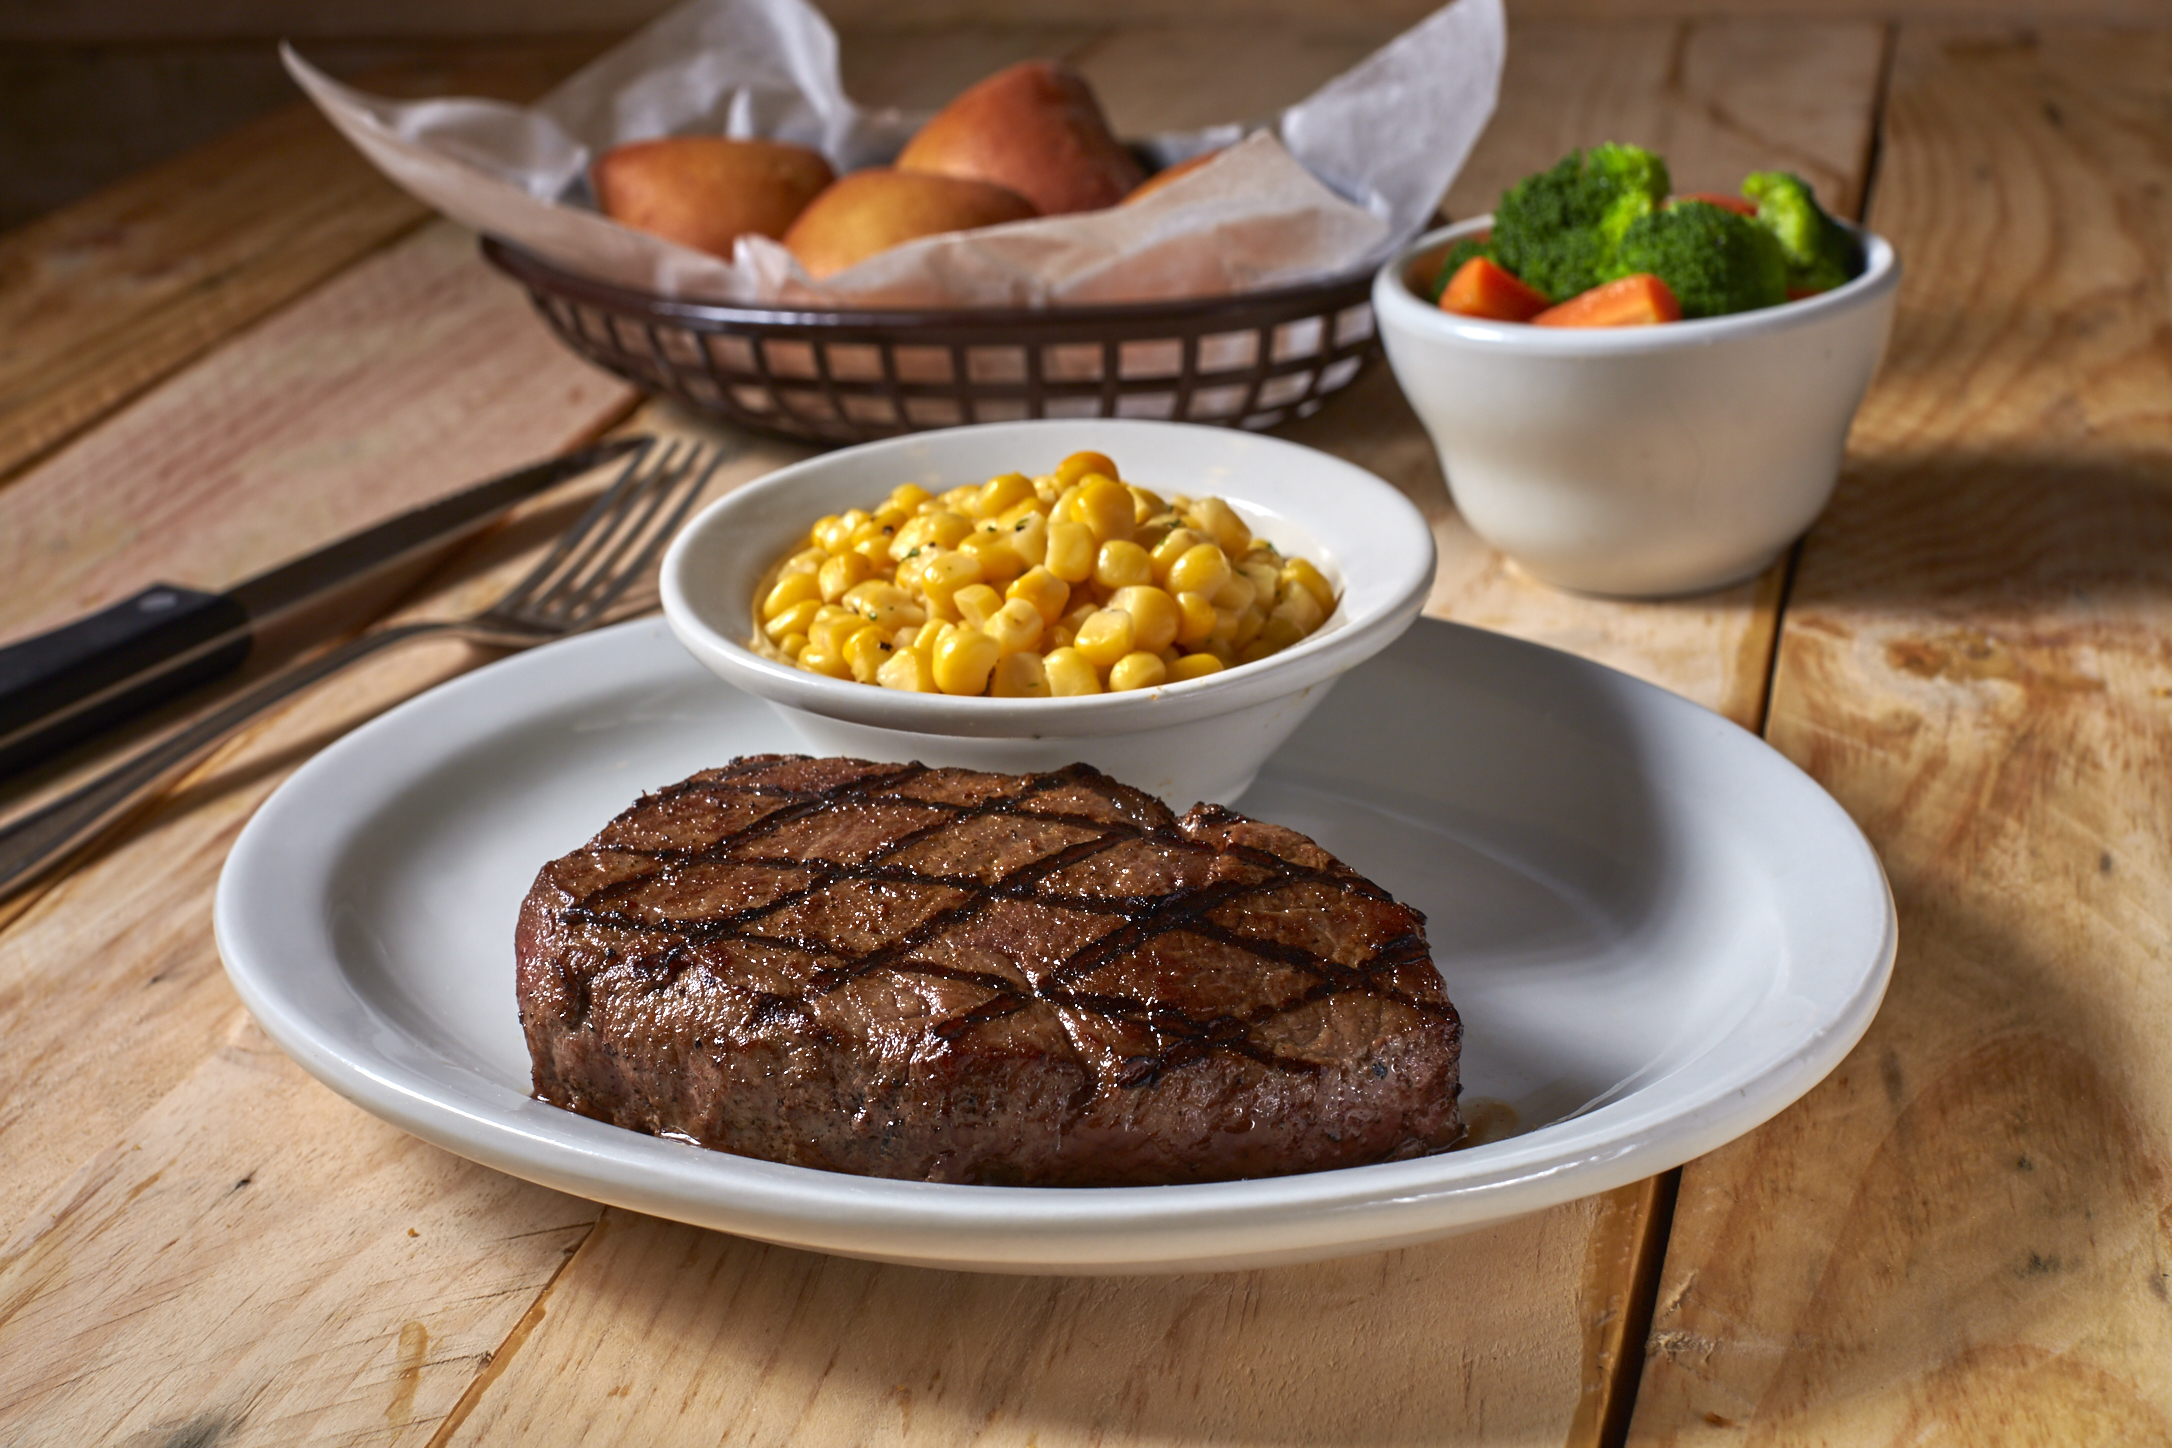 The true taste of Texas is in the restaurant’s high quality hand-cut steaks